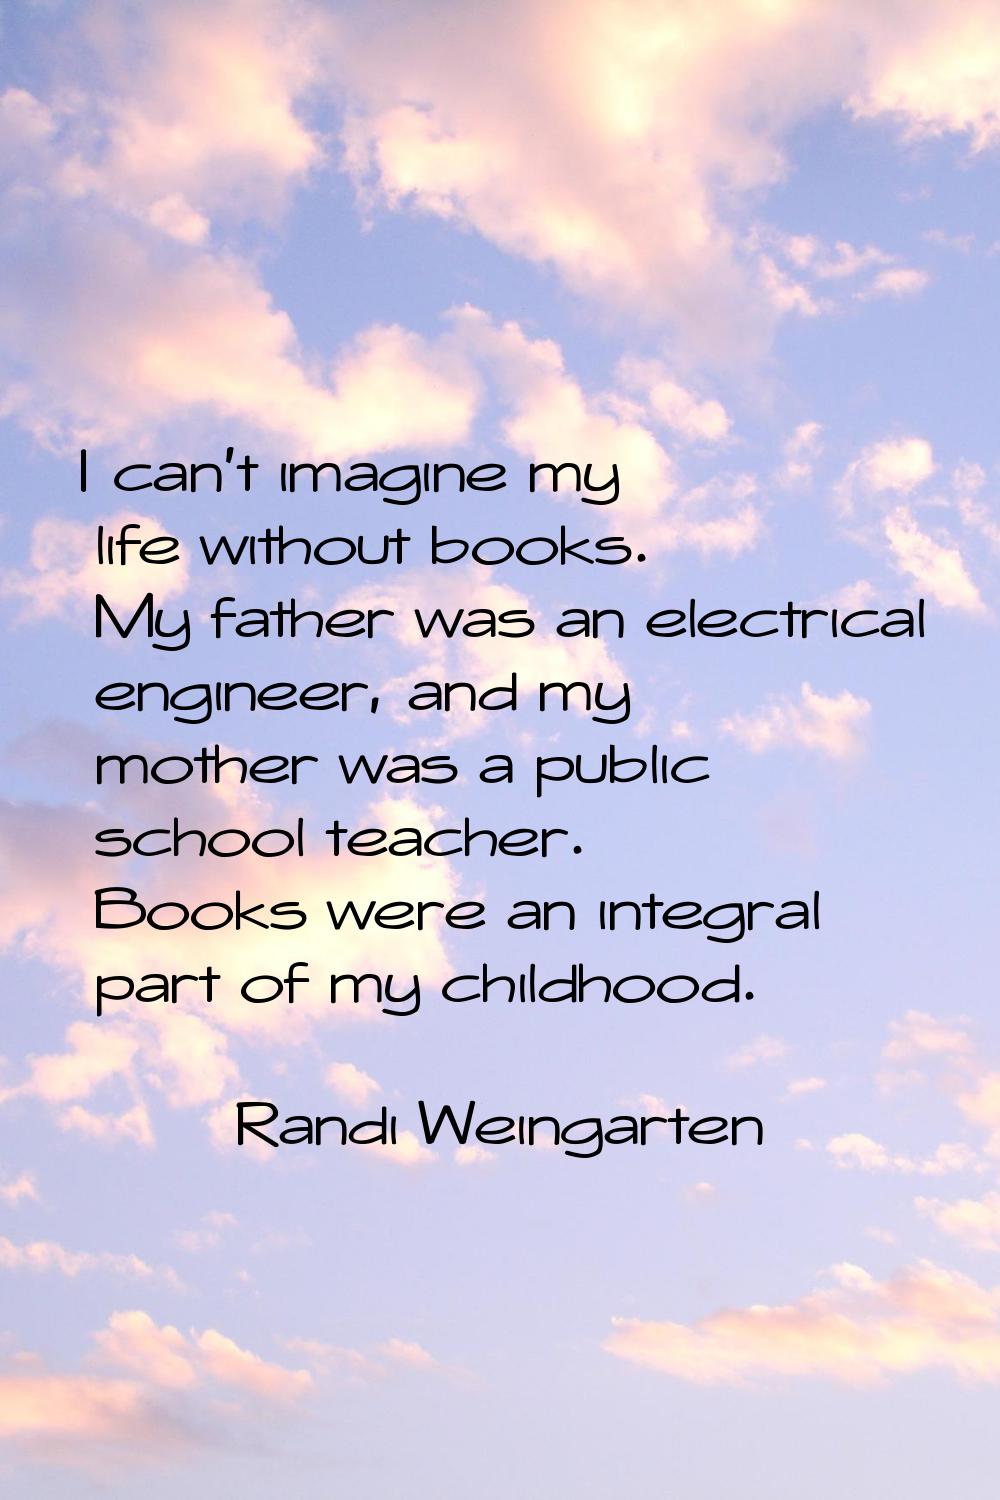 I can't imagine my life without books. My father was an electrical engineer, and my mother was a pu